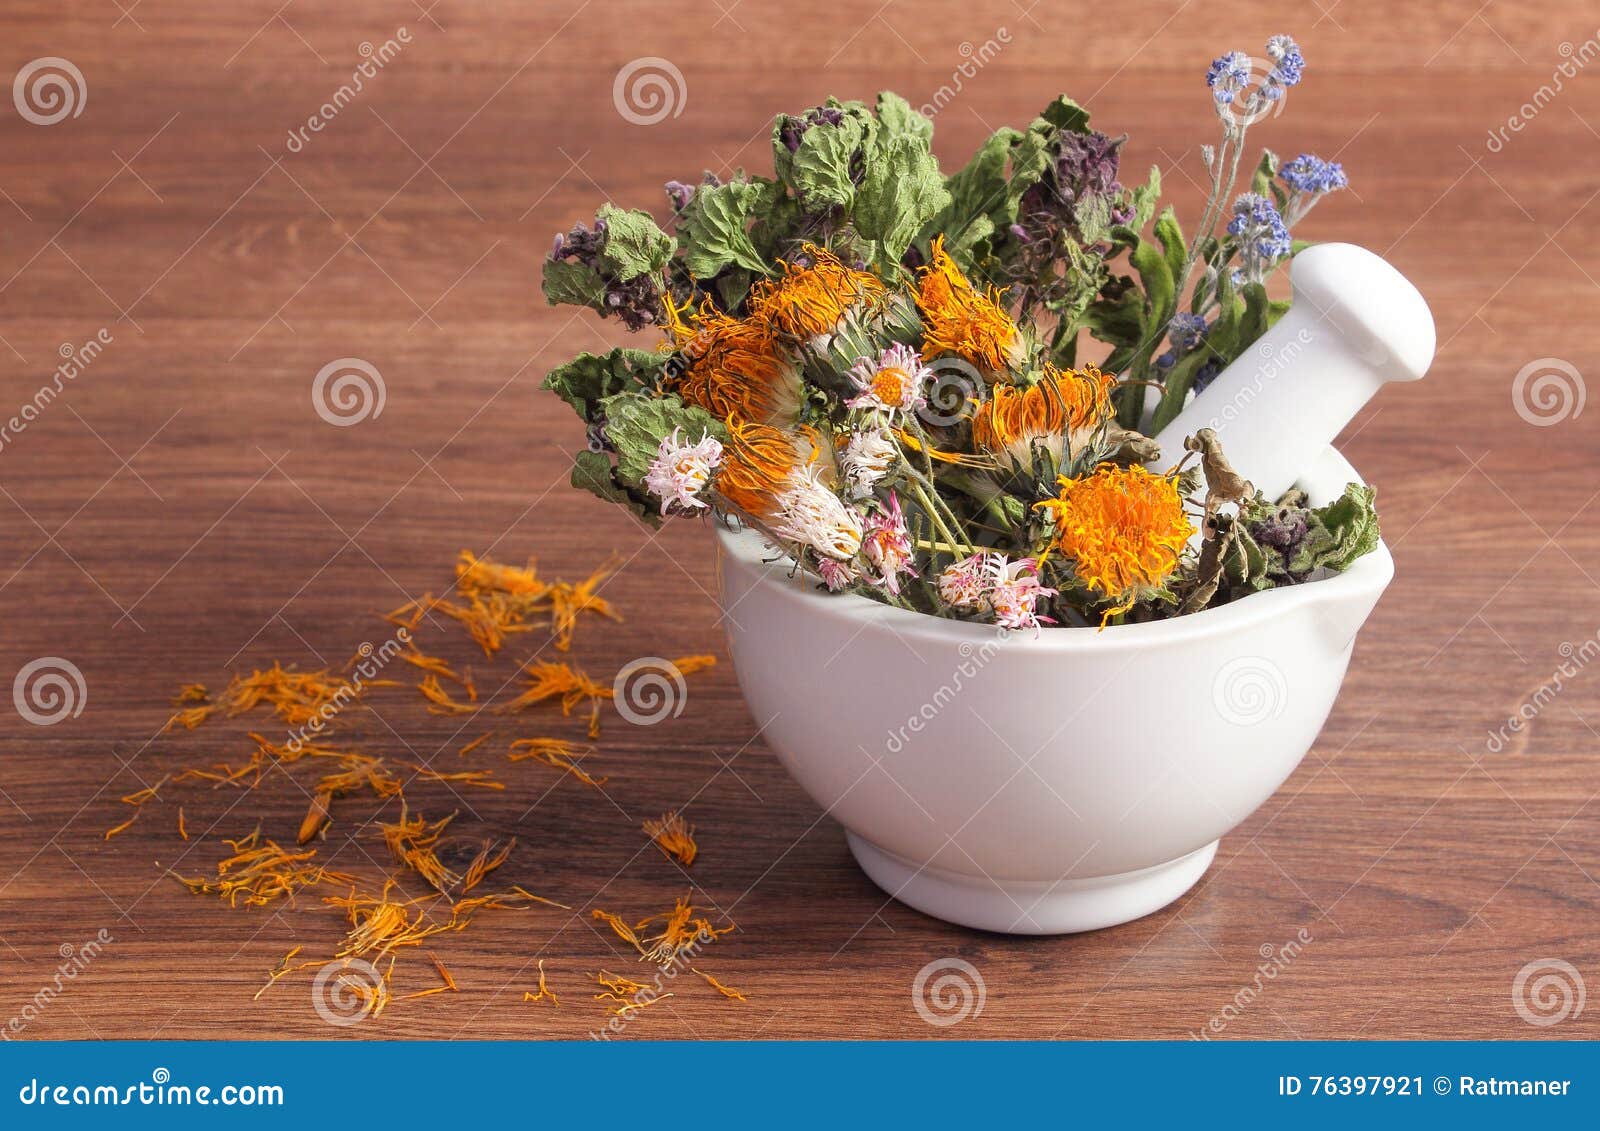 dried herbs and flowers in white mortar, herbalism, decoration